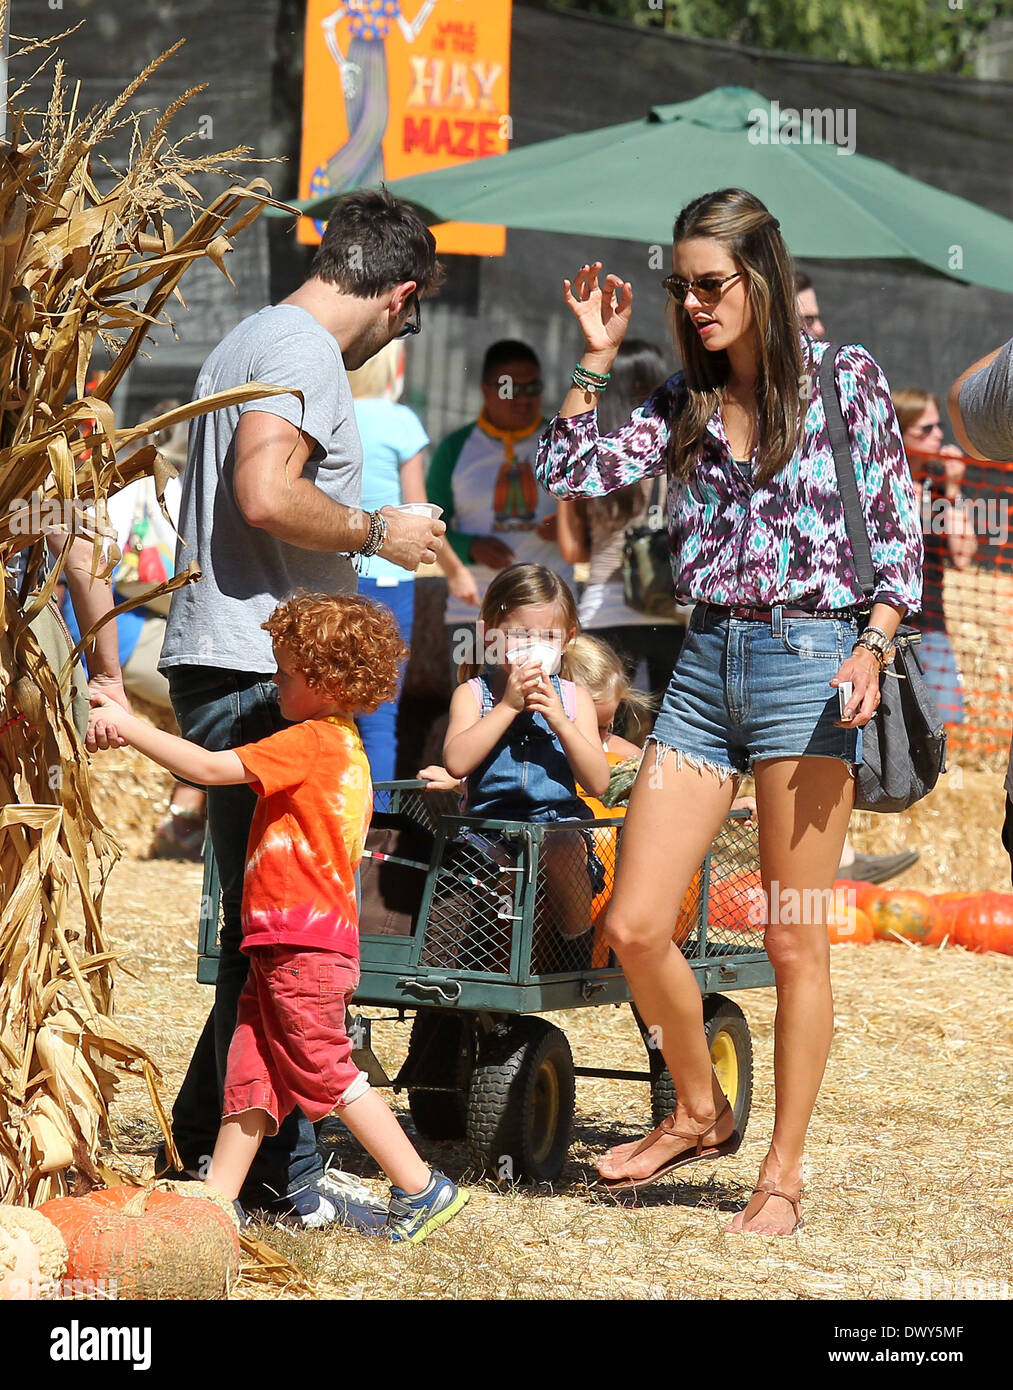 Jamie Mazur, Alessandra Ambrosio and their daughter Anja Celebrity moms and their kids head to Mr. Bones Pumpkin Patch Los Angeles, California - 14.10.12 Where: United States When: 14 Oct 2012 Stock Photo